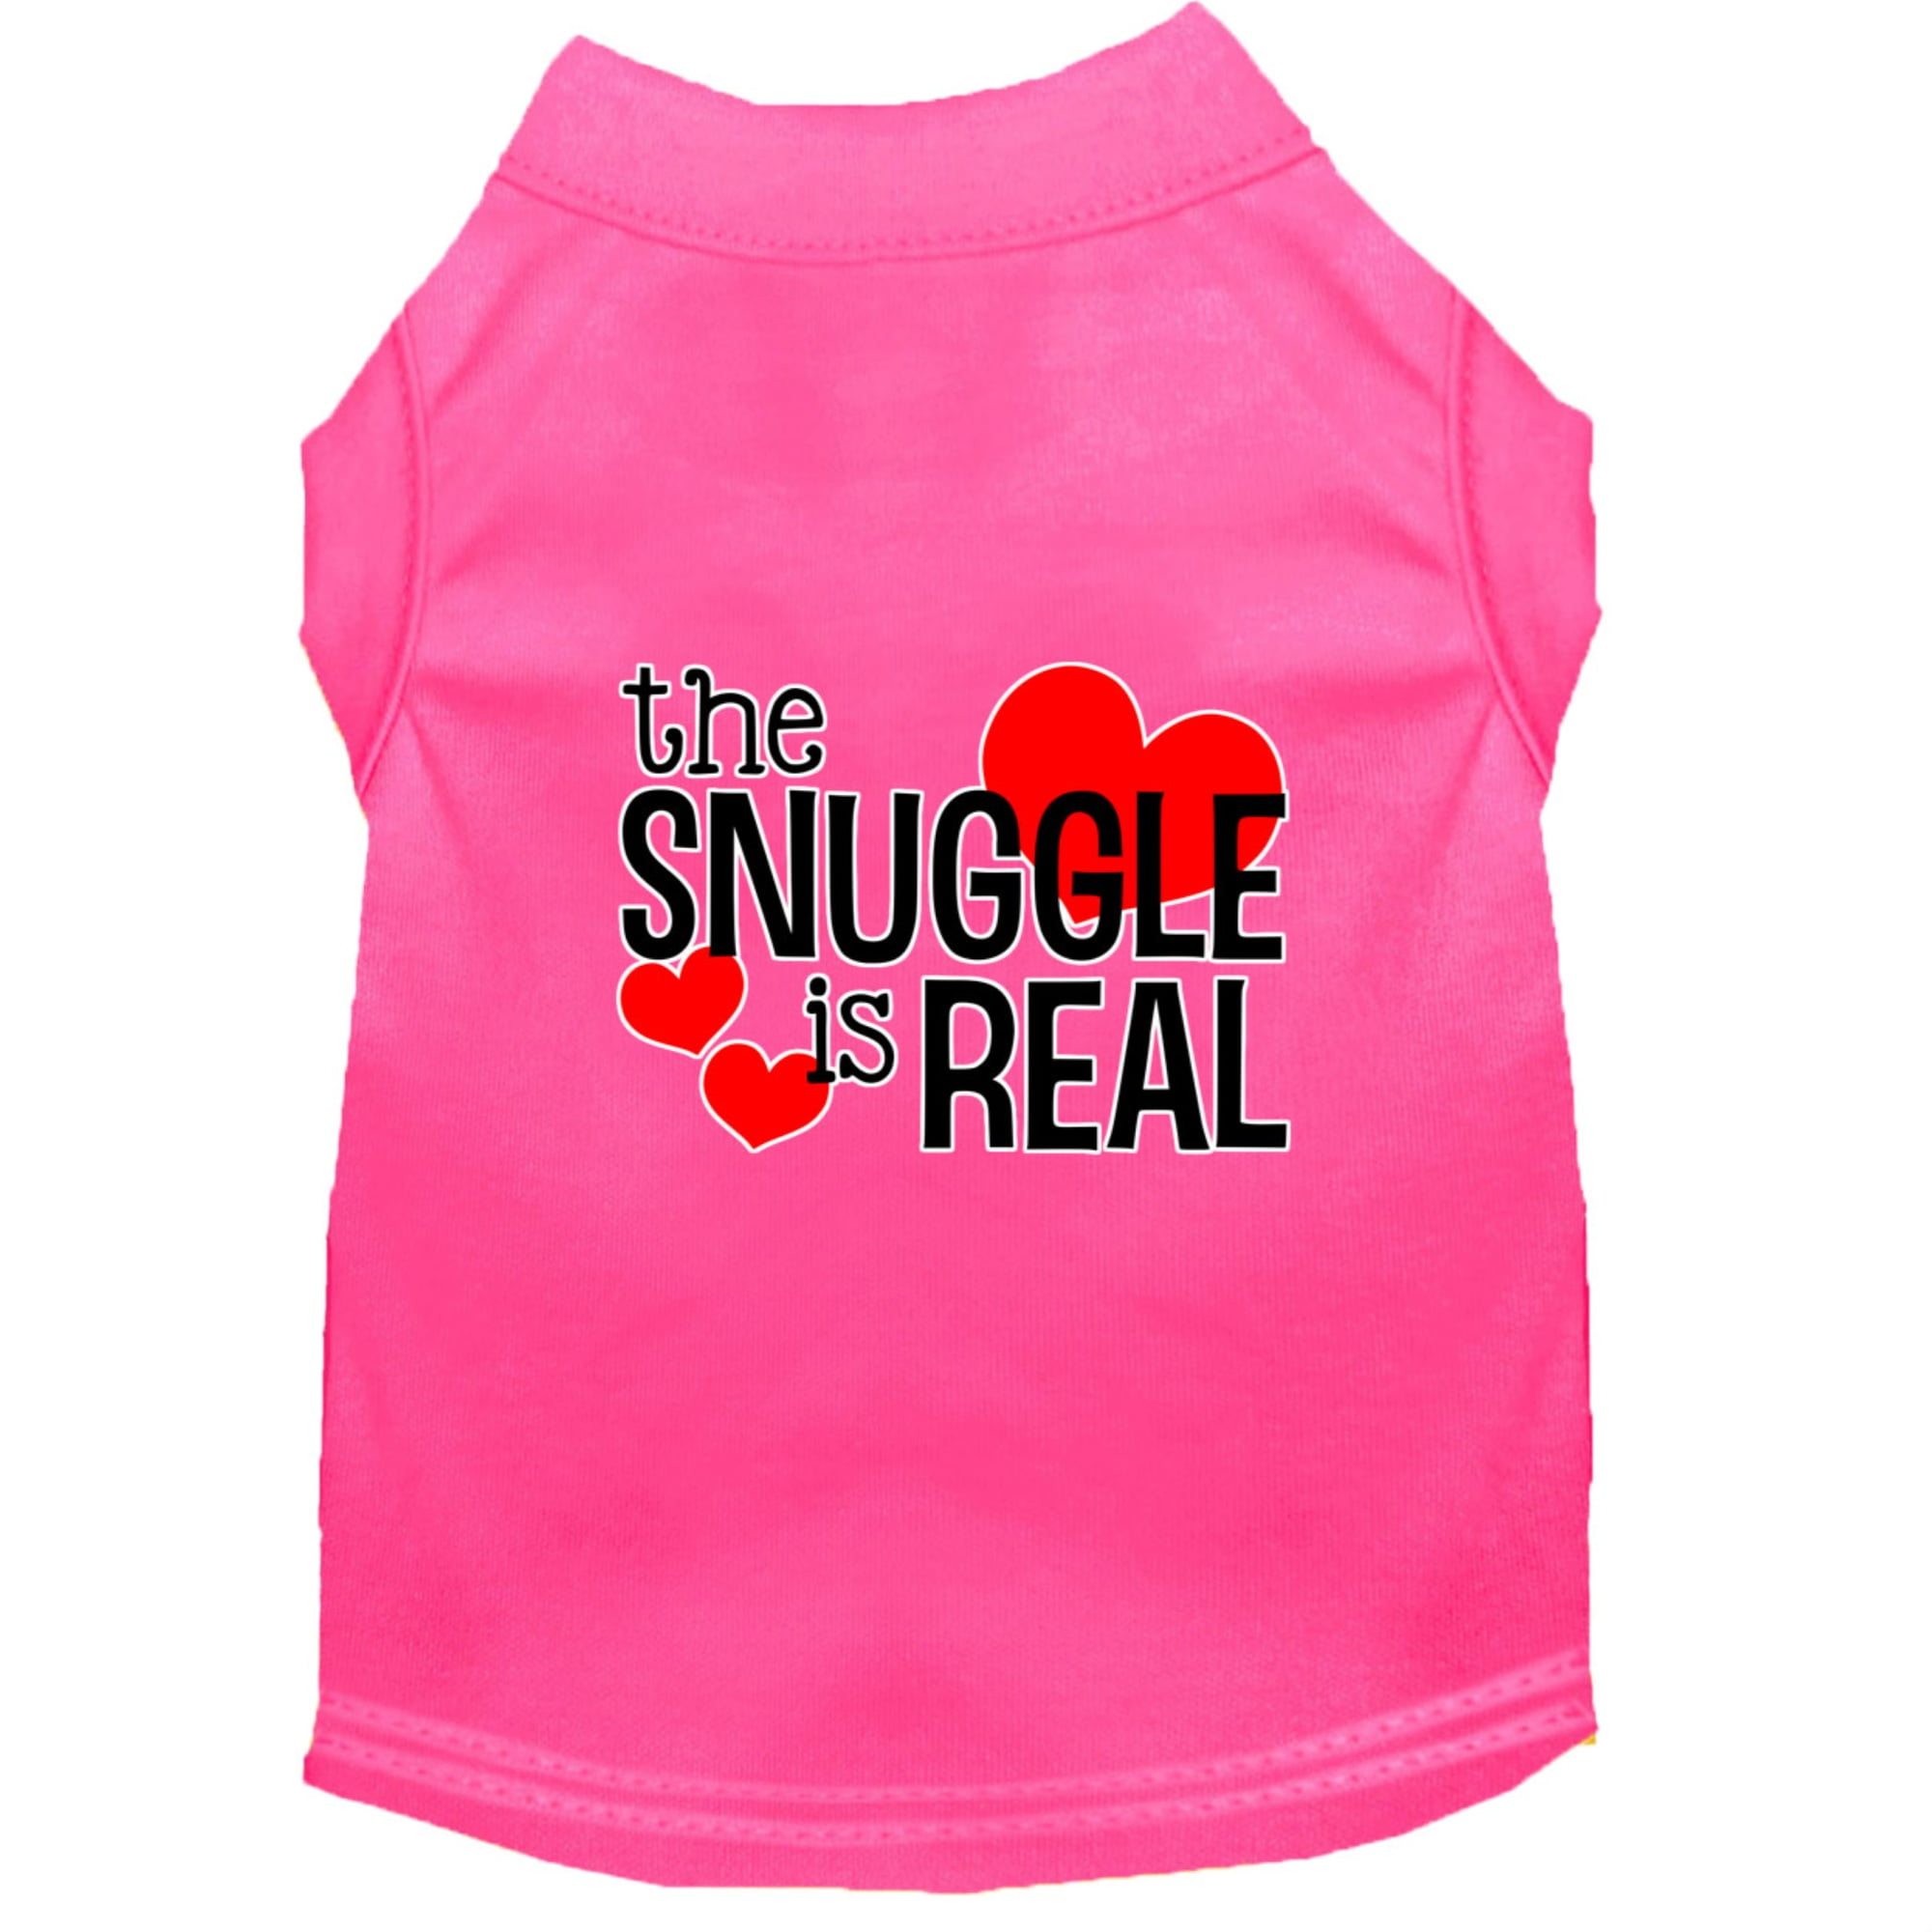 The Snuggle Is Real Cute Adorable Shower Youth Toddler T-Shirt Tees Tshirts 